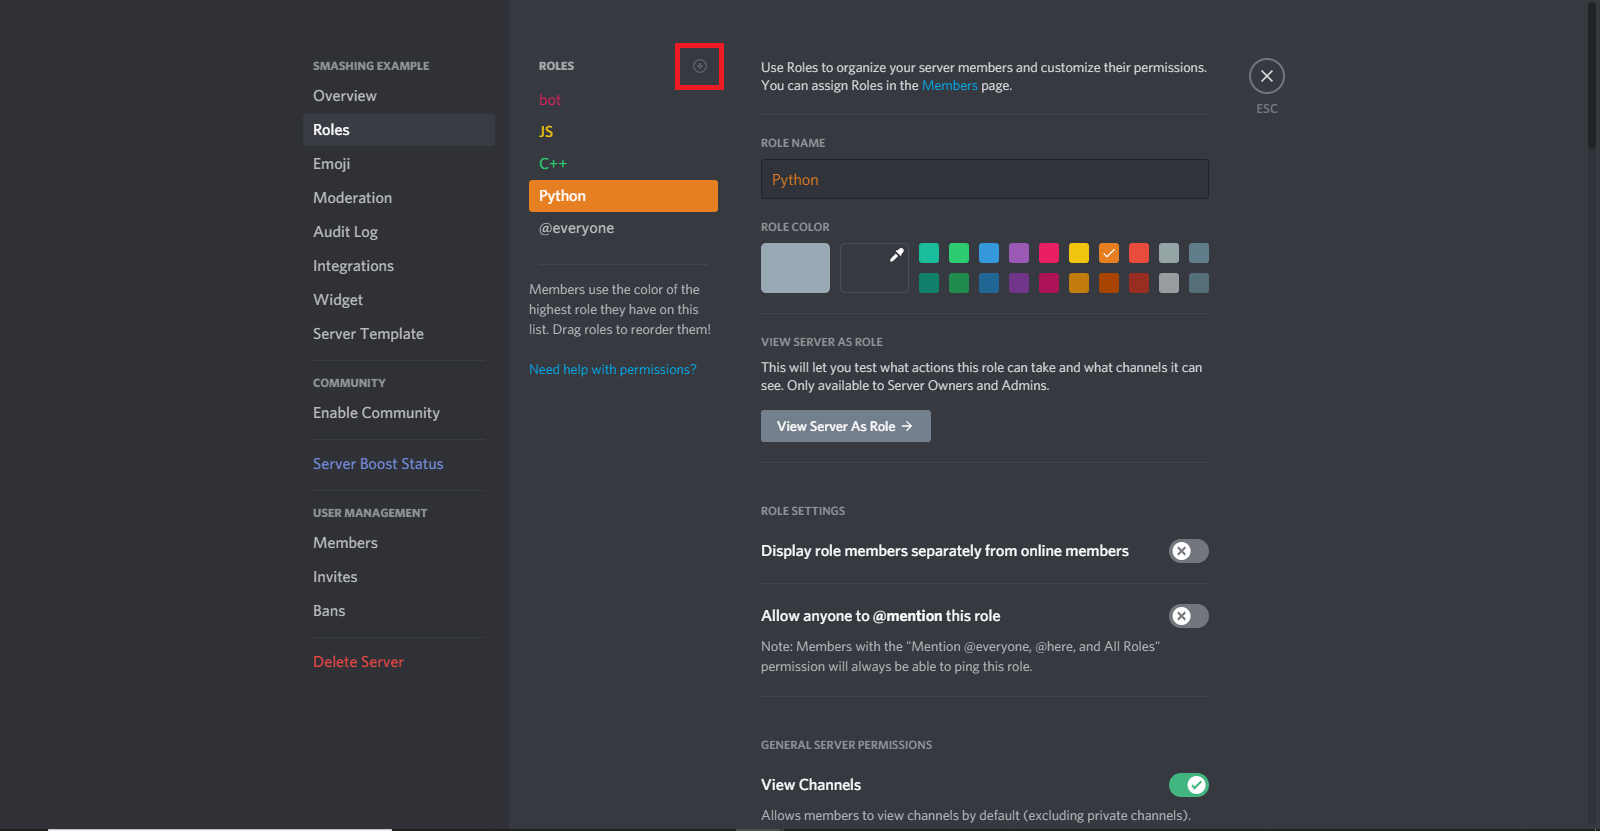 How to Build a Discord Bot using JavaScript